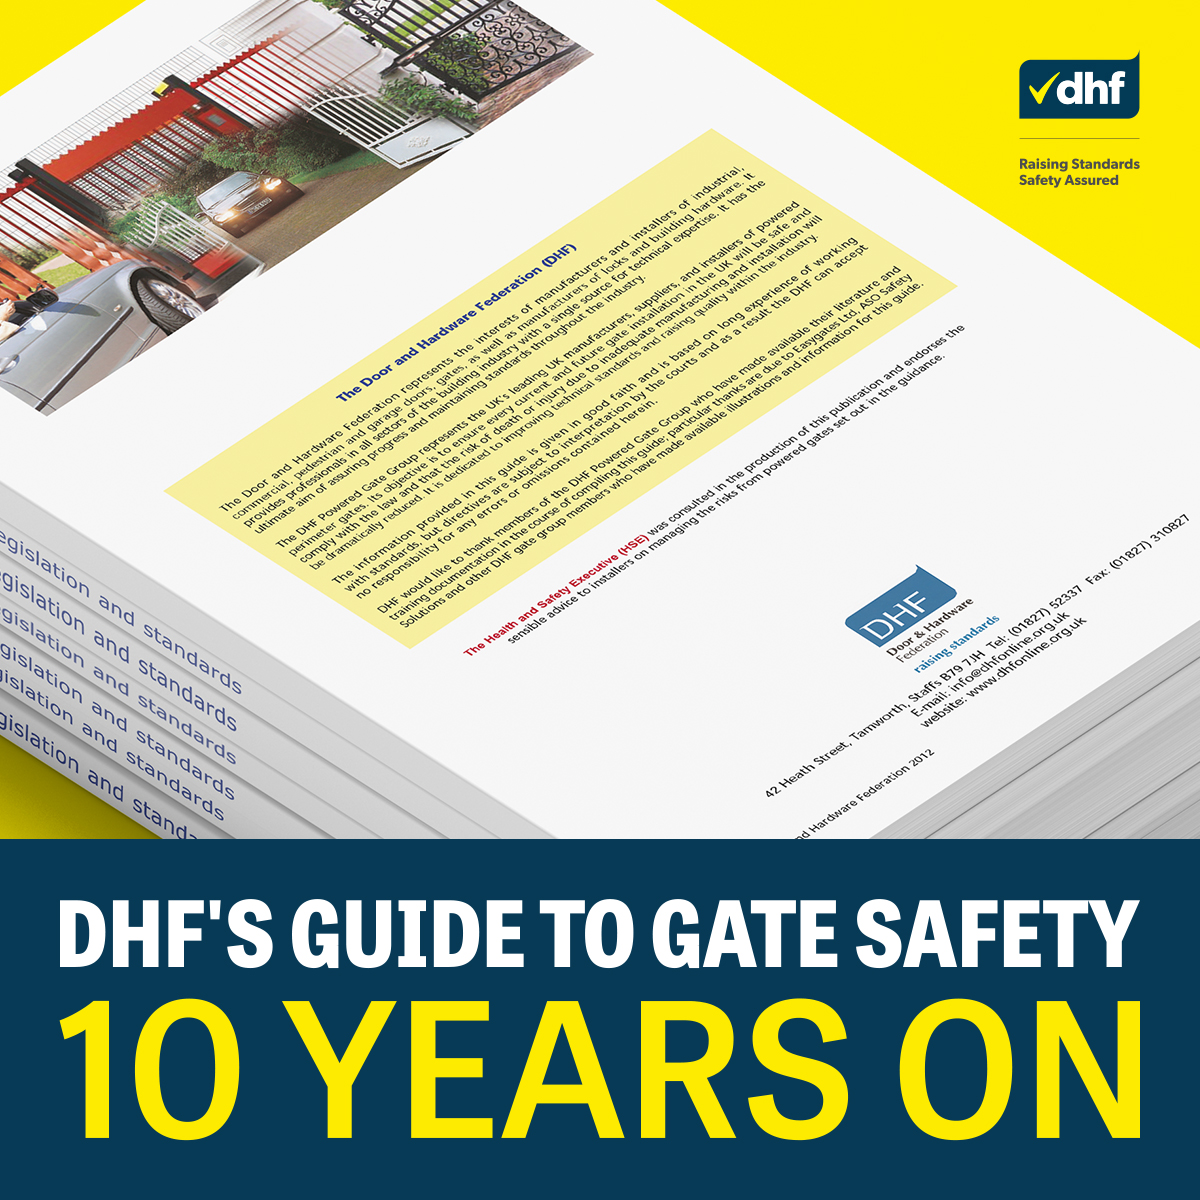 DHF's Guide to Gate Safety - 10 Years On